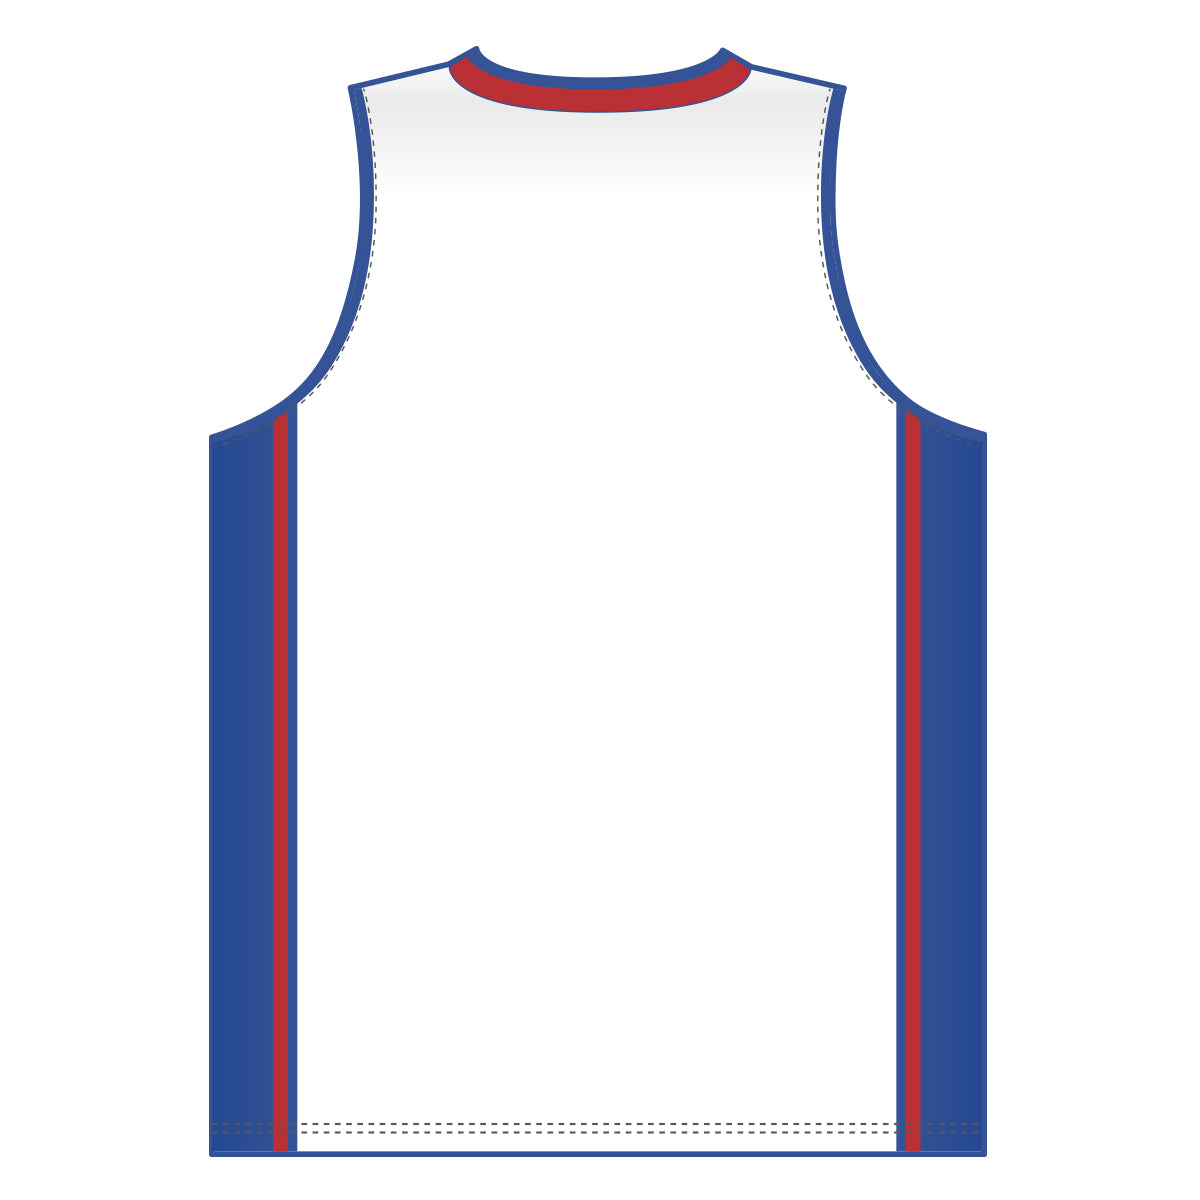 Dry-Flex Pro Style Basketball Jersey-White-Royal-Red